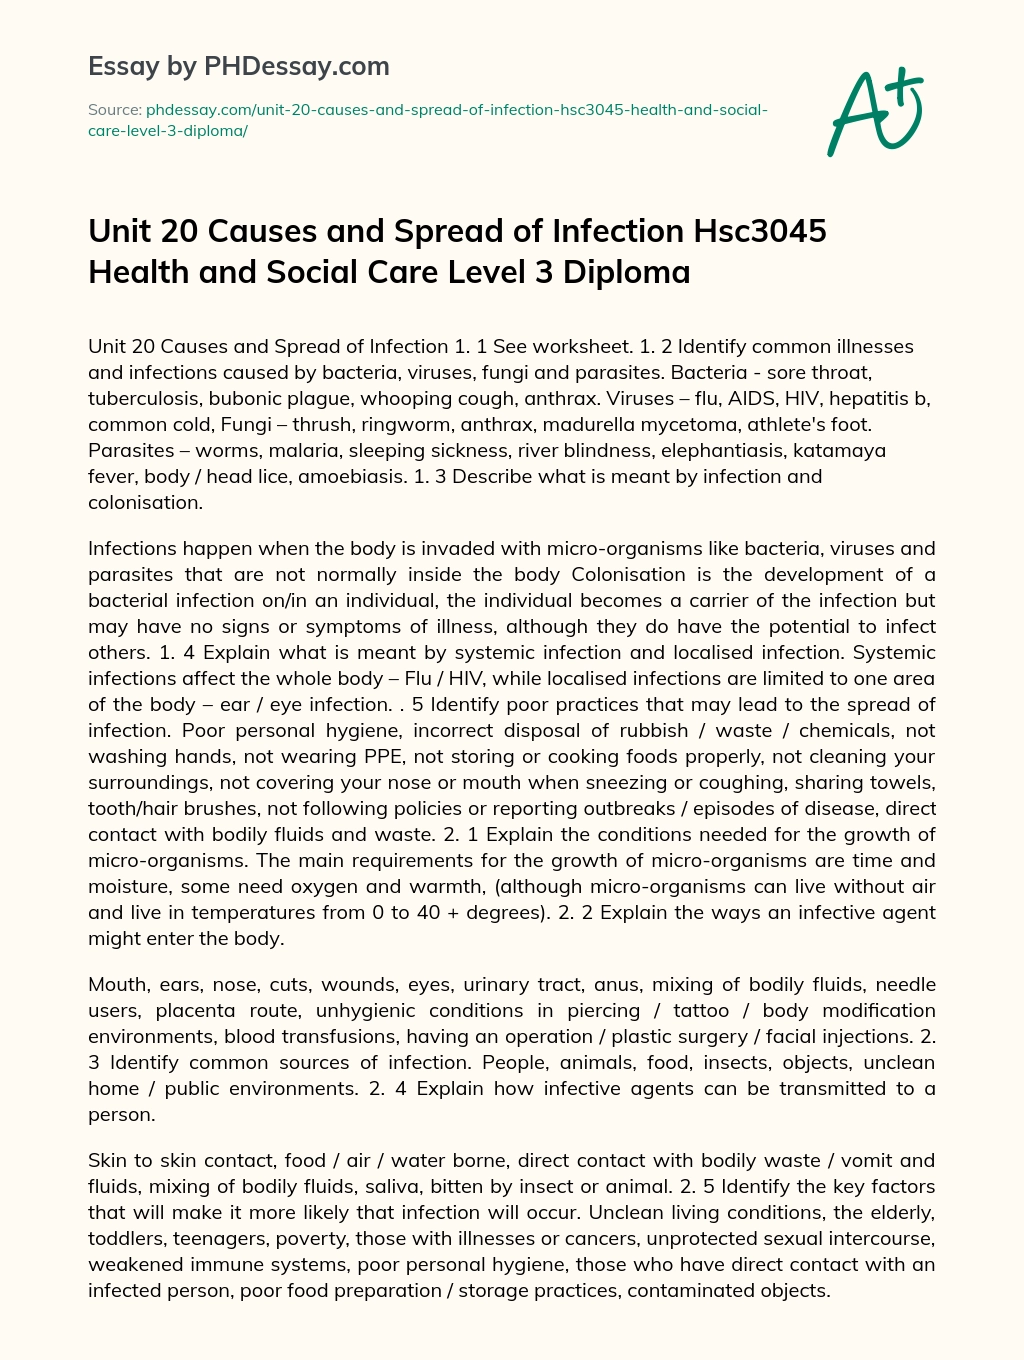 Unit 20 Causes and Spread of Infection Hsc3045 Health and Social Care Level 3 Diploma essay